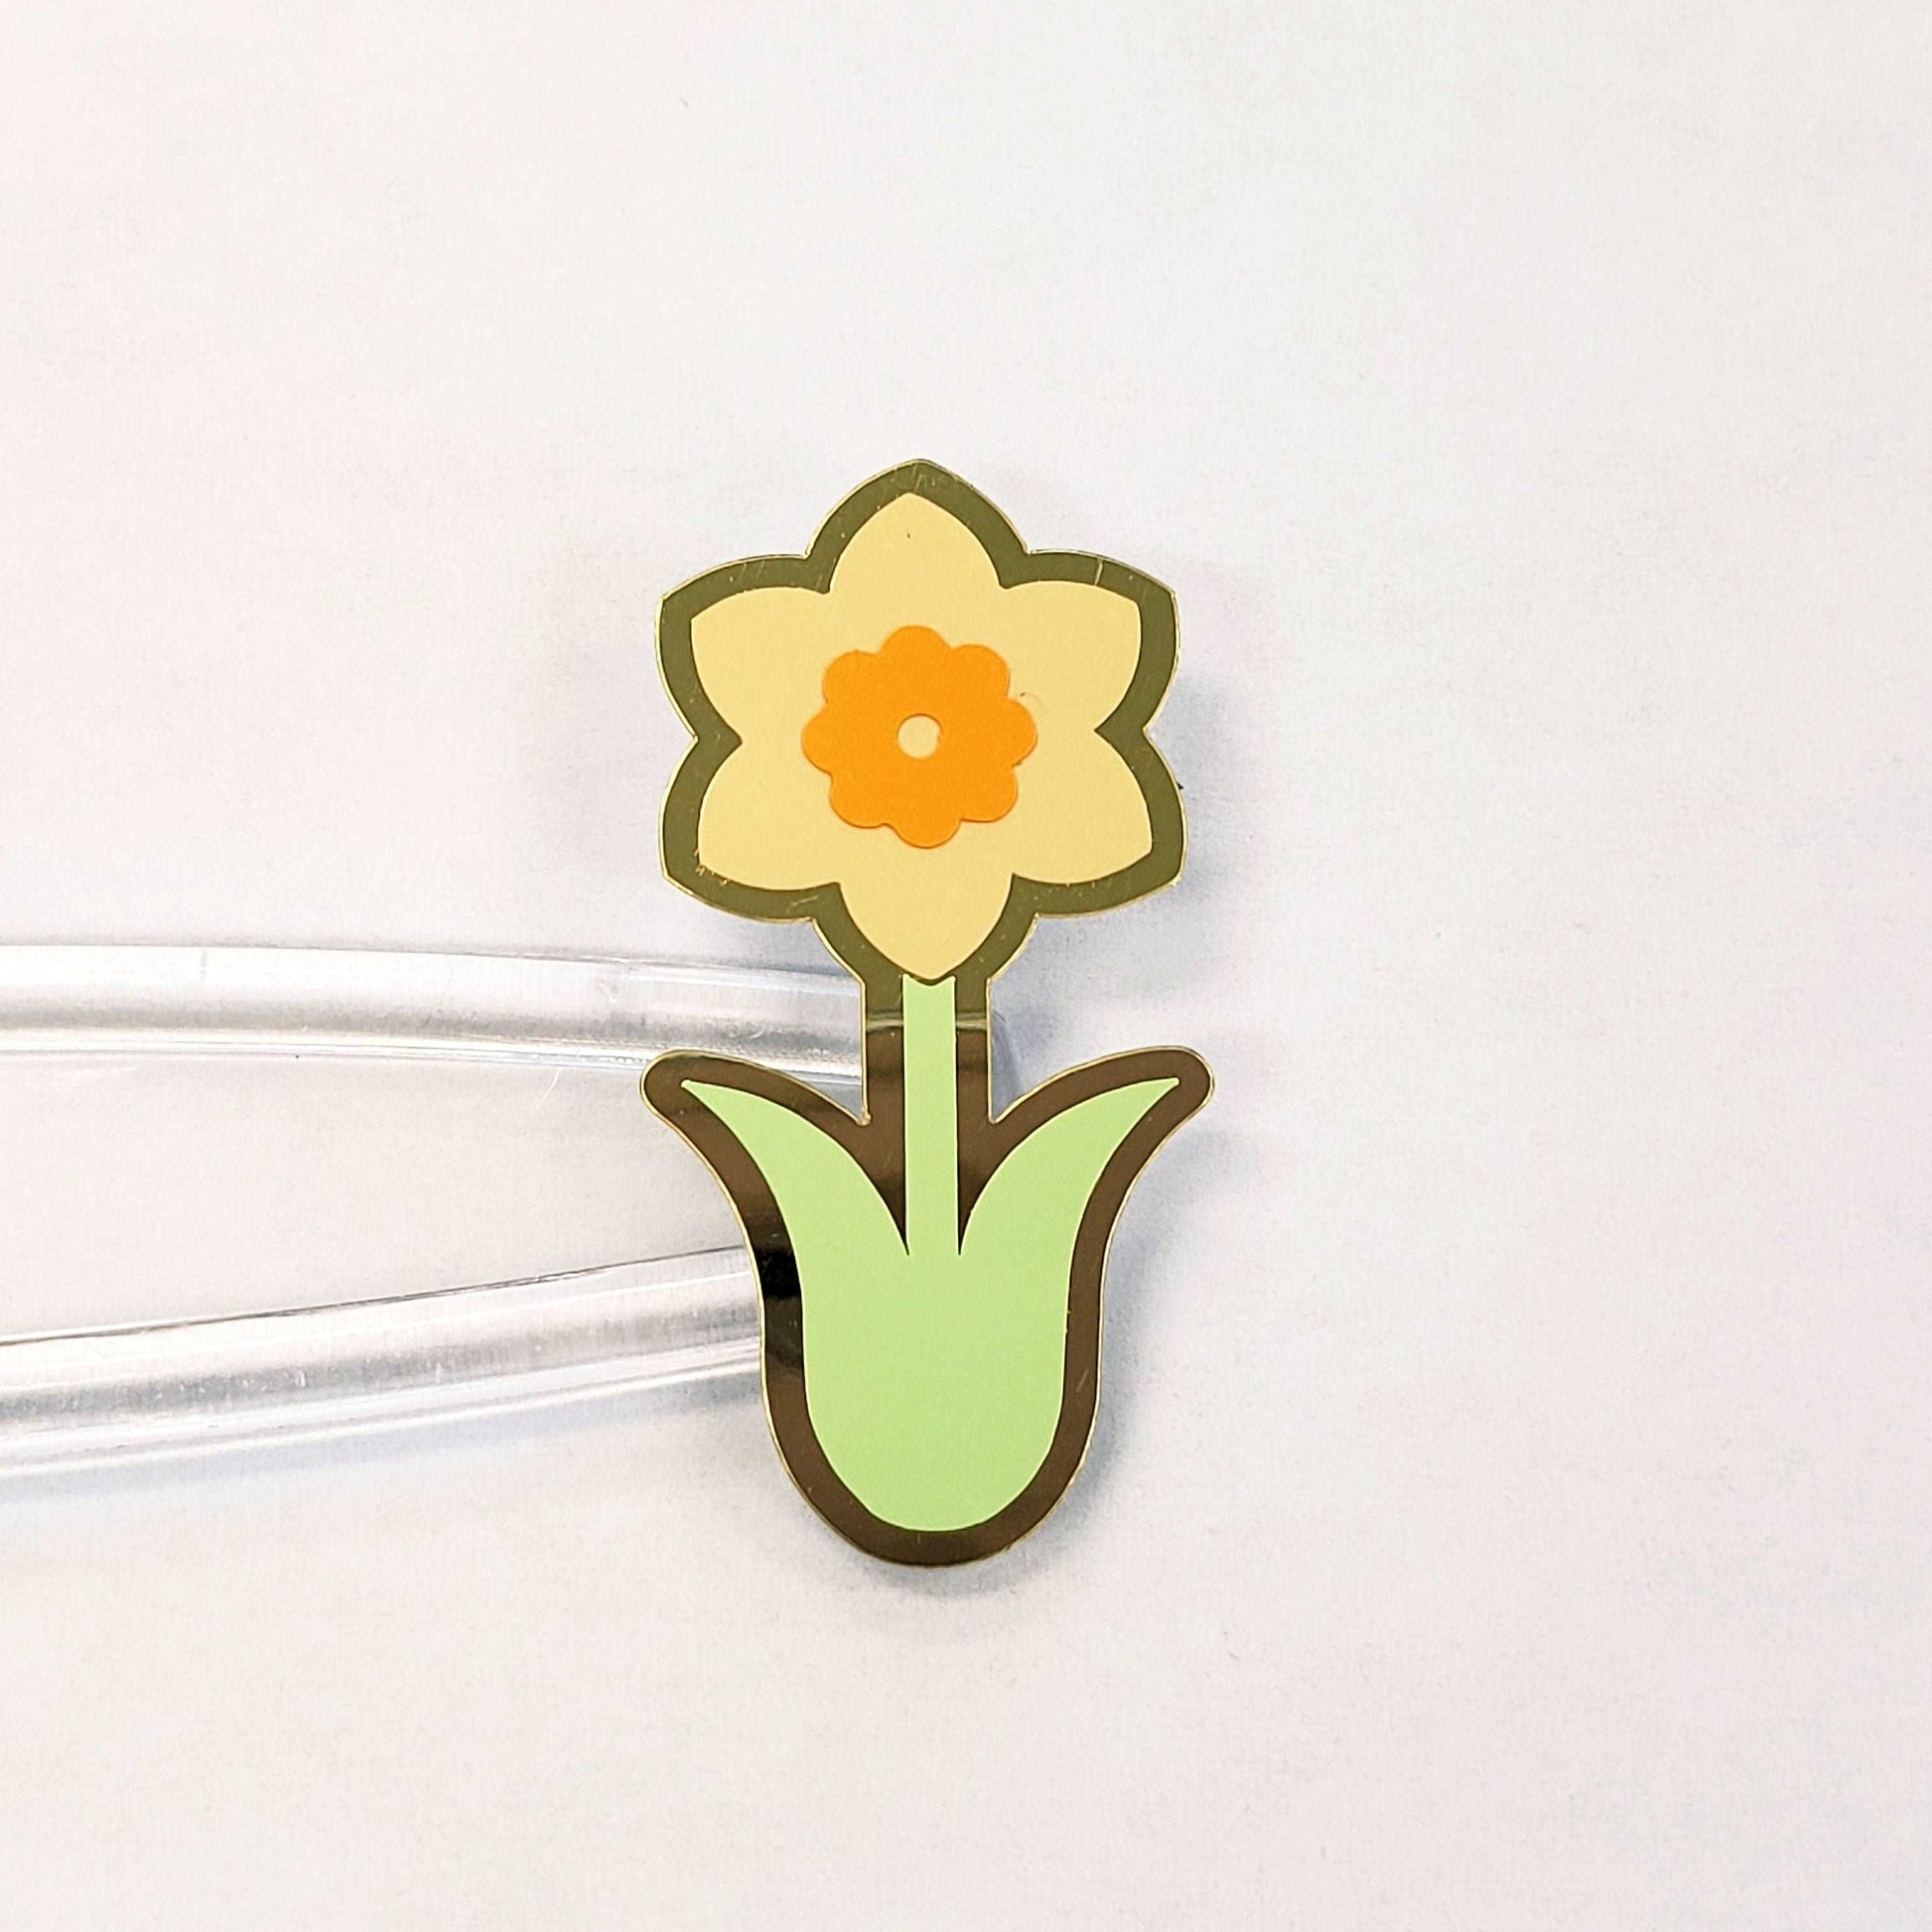 Pastel Yellow Daffodil Stickers, set of 35 flower decals for Easter, Mother's Day, Spring weddings, sticker gift for gardeners.